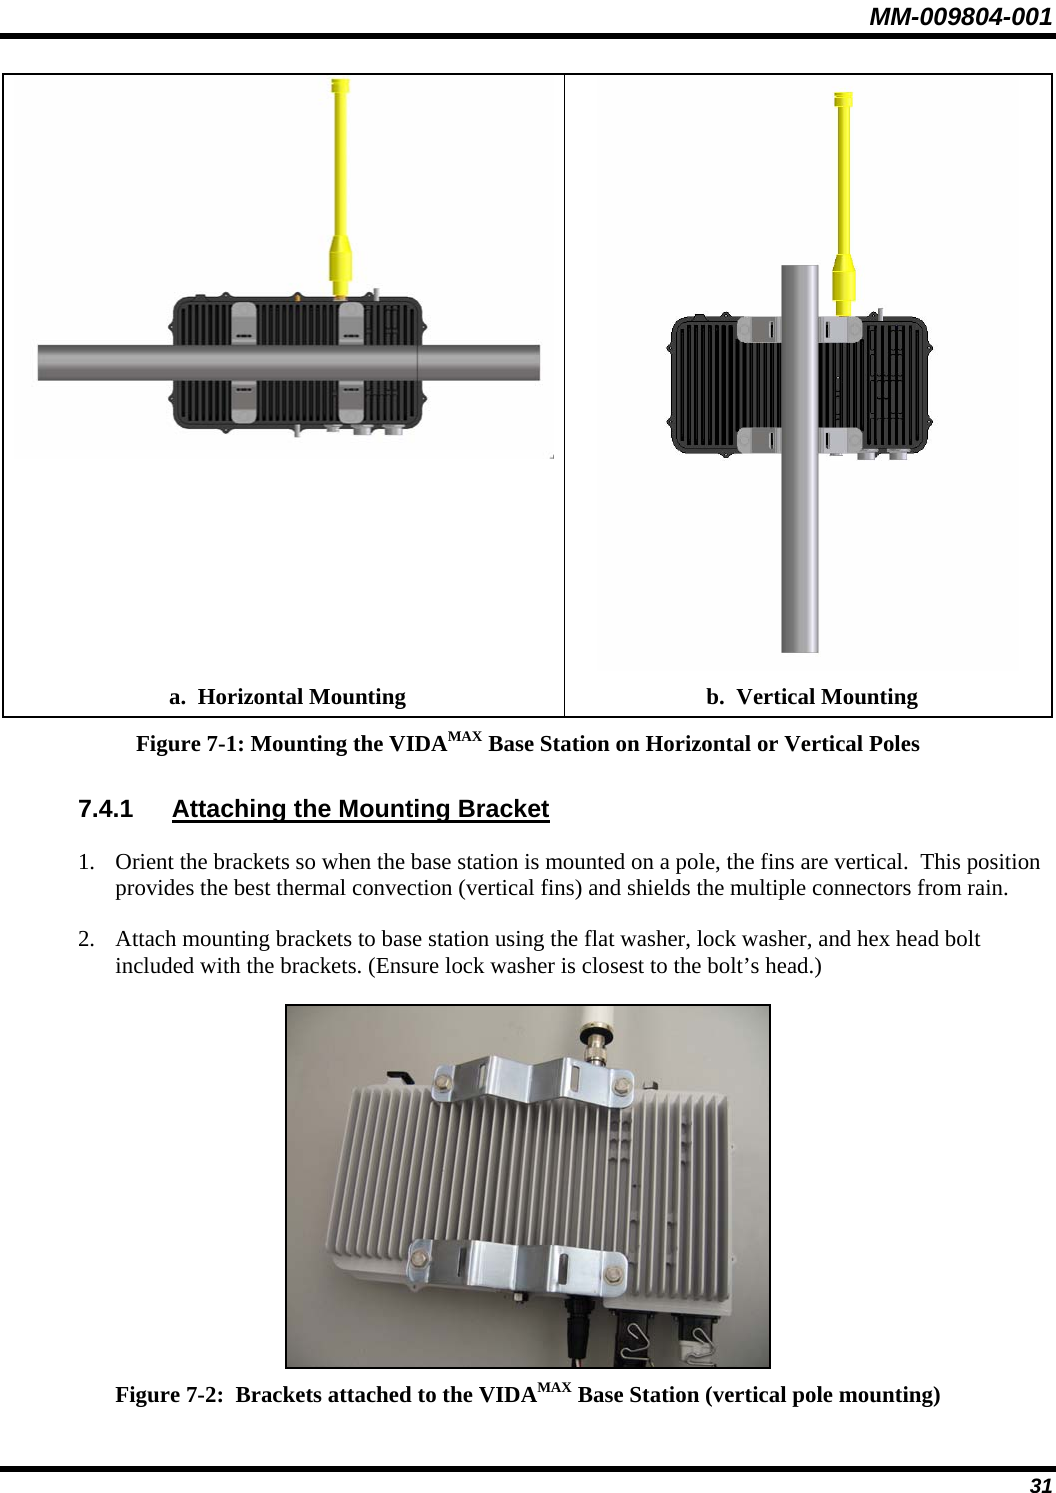 MM-009804-001   a.  Horizontal Mounting  b.  Vertical Mounting Figure 7-1: Mounting the VIDAMAX Base Station on Horizontal or Vertical Poles 7.4.1  Attaching the Mounting Bracket 1. Orient the brackets so when the base station is mounted on a pole, the fins are vertical.  This position provides the best thermal convection (vertical fins) and shields the multiple connectors from rain. 2. Attach mounting brackets to base station using the flat washer, lock washer, and hex head bolt included with the brackets. (Ensure lock washer is closest to the bolt’s head.)  Figure 7-2:  Brackets attached to the VIDAMAX Base Station (vertical pole mounting)  31 